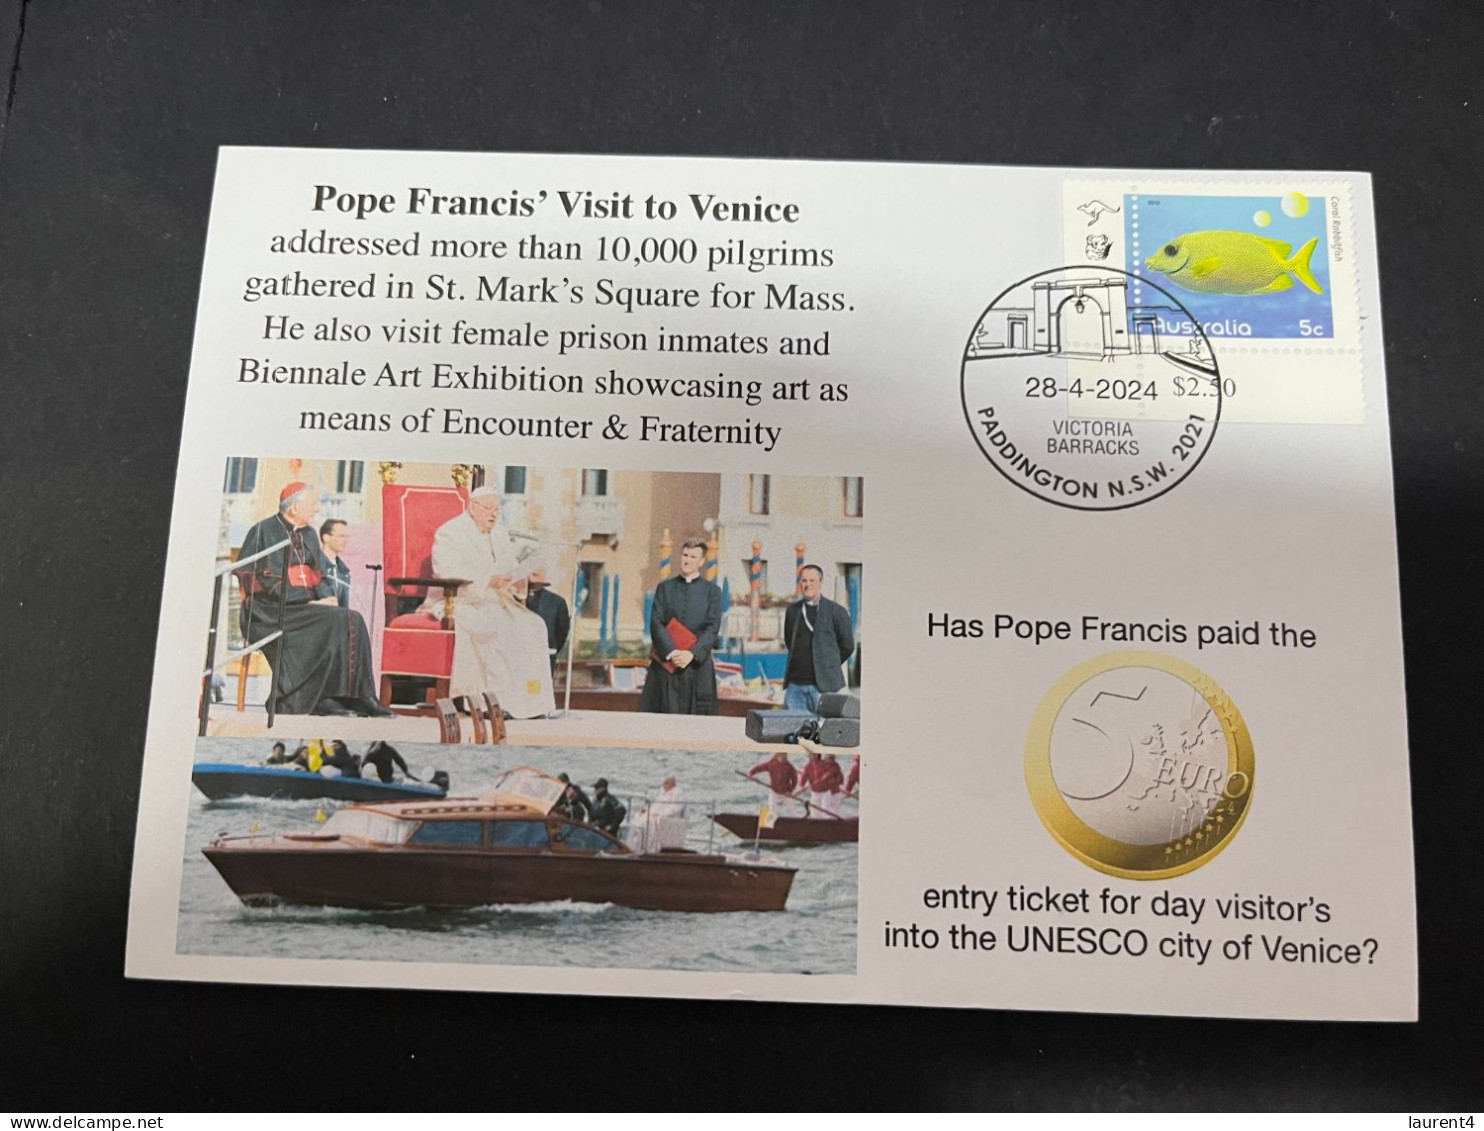 30-4-2024 (3 Z 26) Pope Francis Visit To Venice In Italy (28-4-2024) OZ Stamp (1 Cover) 5 Euro Visit Fee Paid ? - Christendom